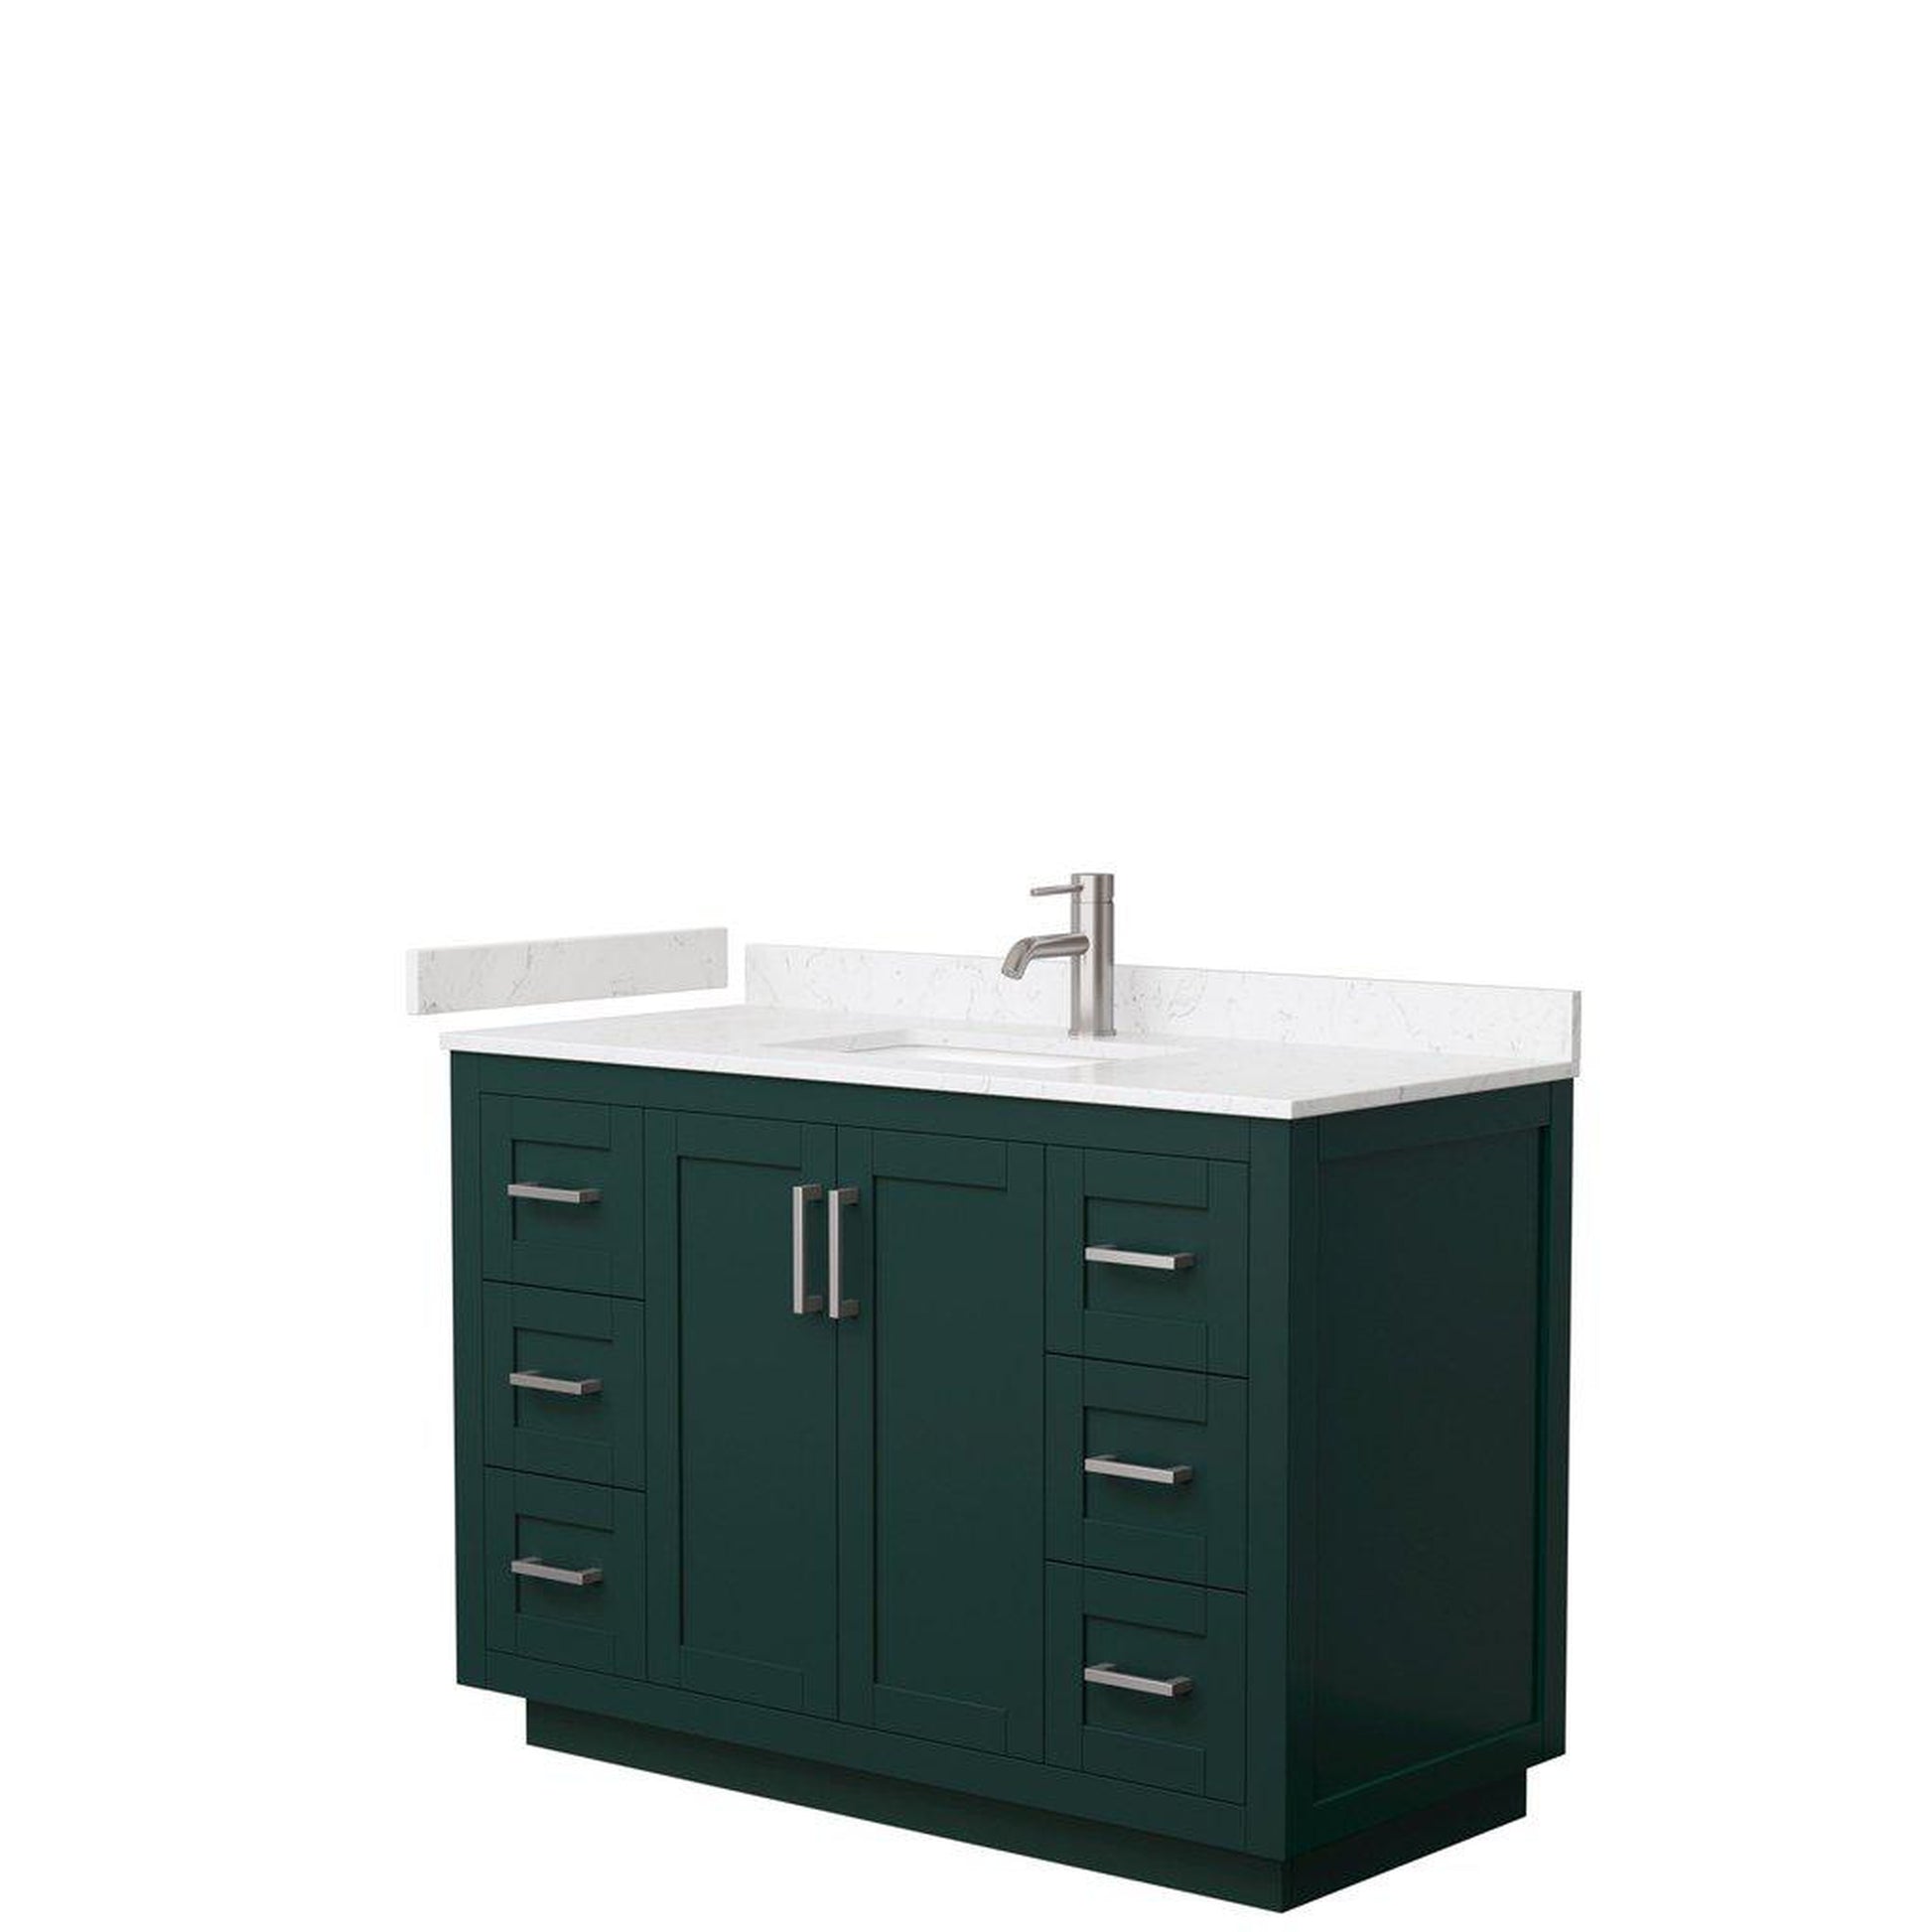 Wyndham Collection Miranda 48" Single Bathroom Green Vanity Set With Light-Vein Carrara Cultured Marble Countertop, Undermount Square Sink, And Brushed Nickel Trim